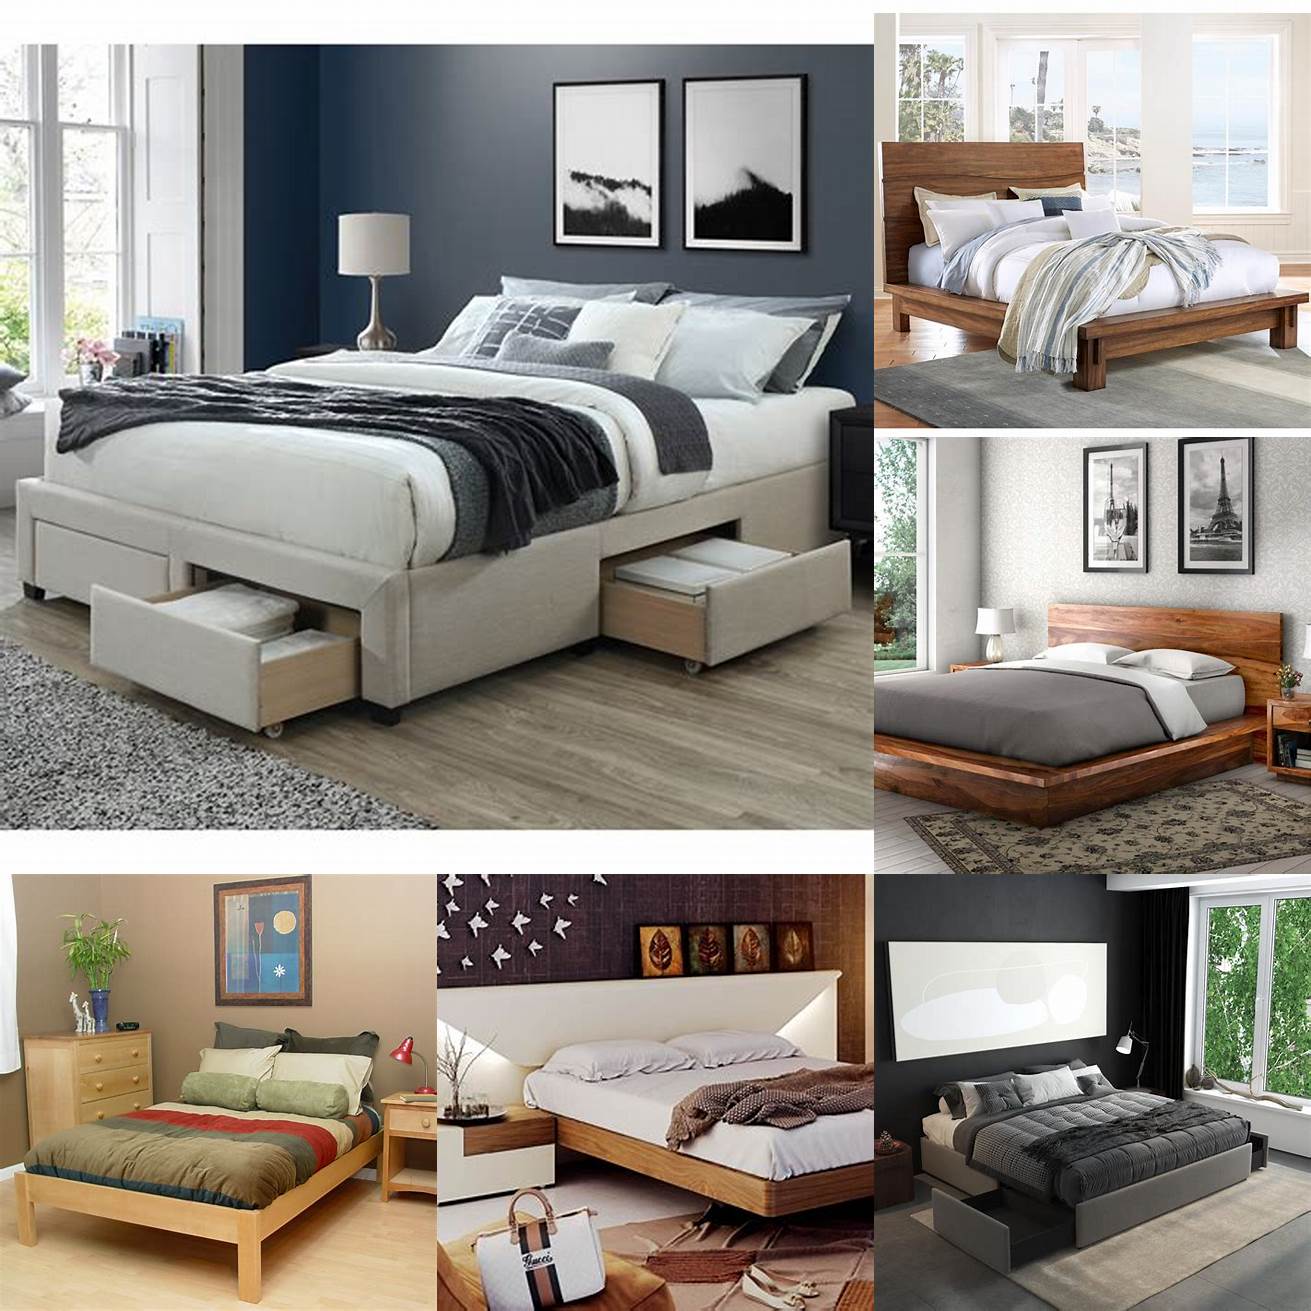 Price Platform beds can be more expensive than traditional beds due to their design materials and additional storage features